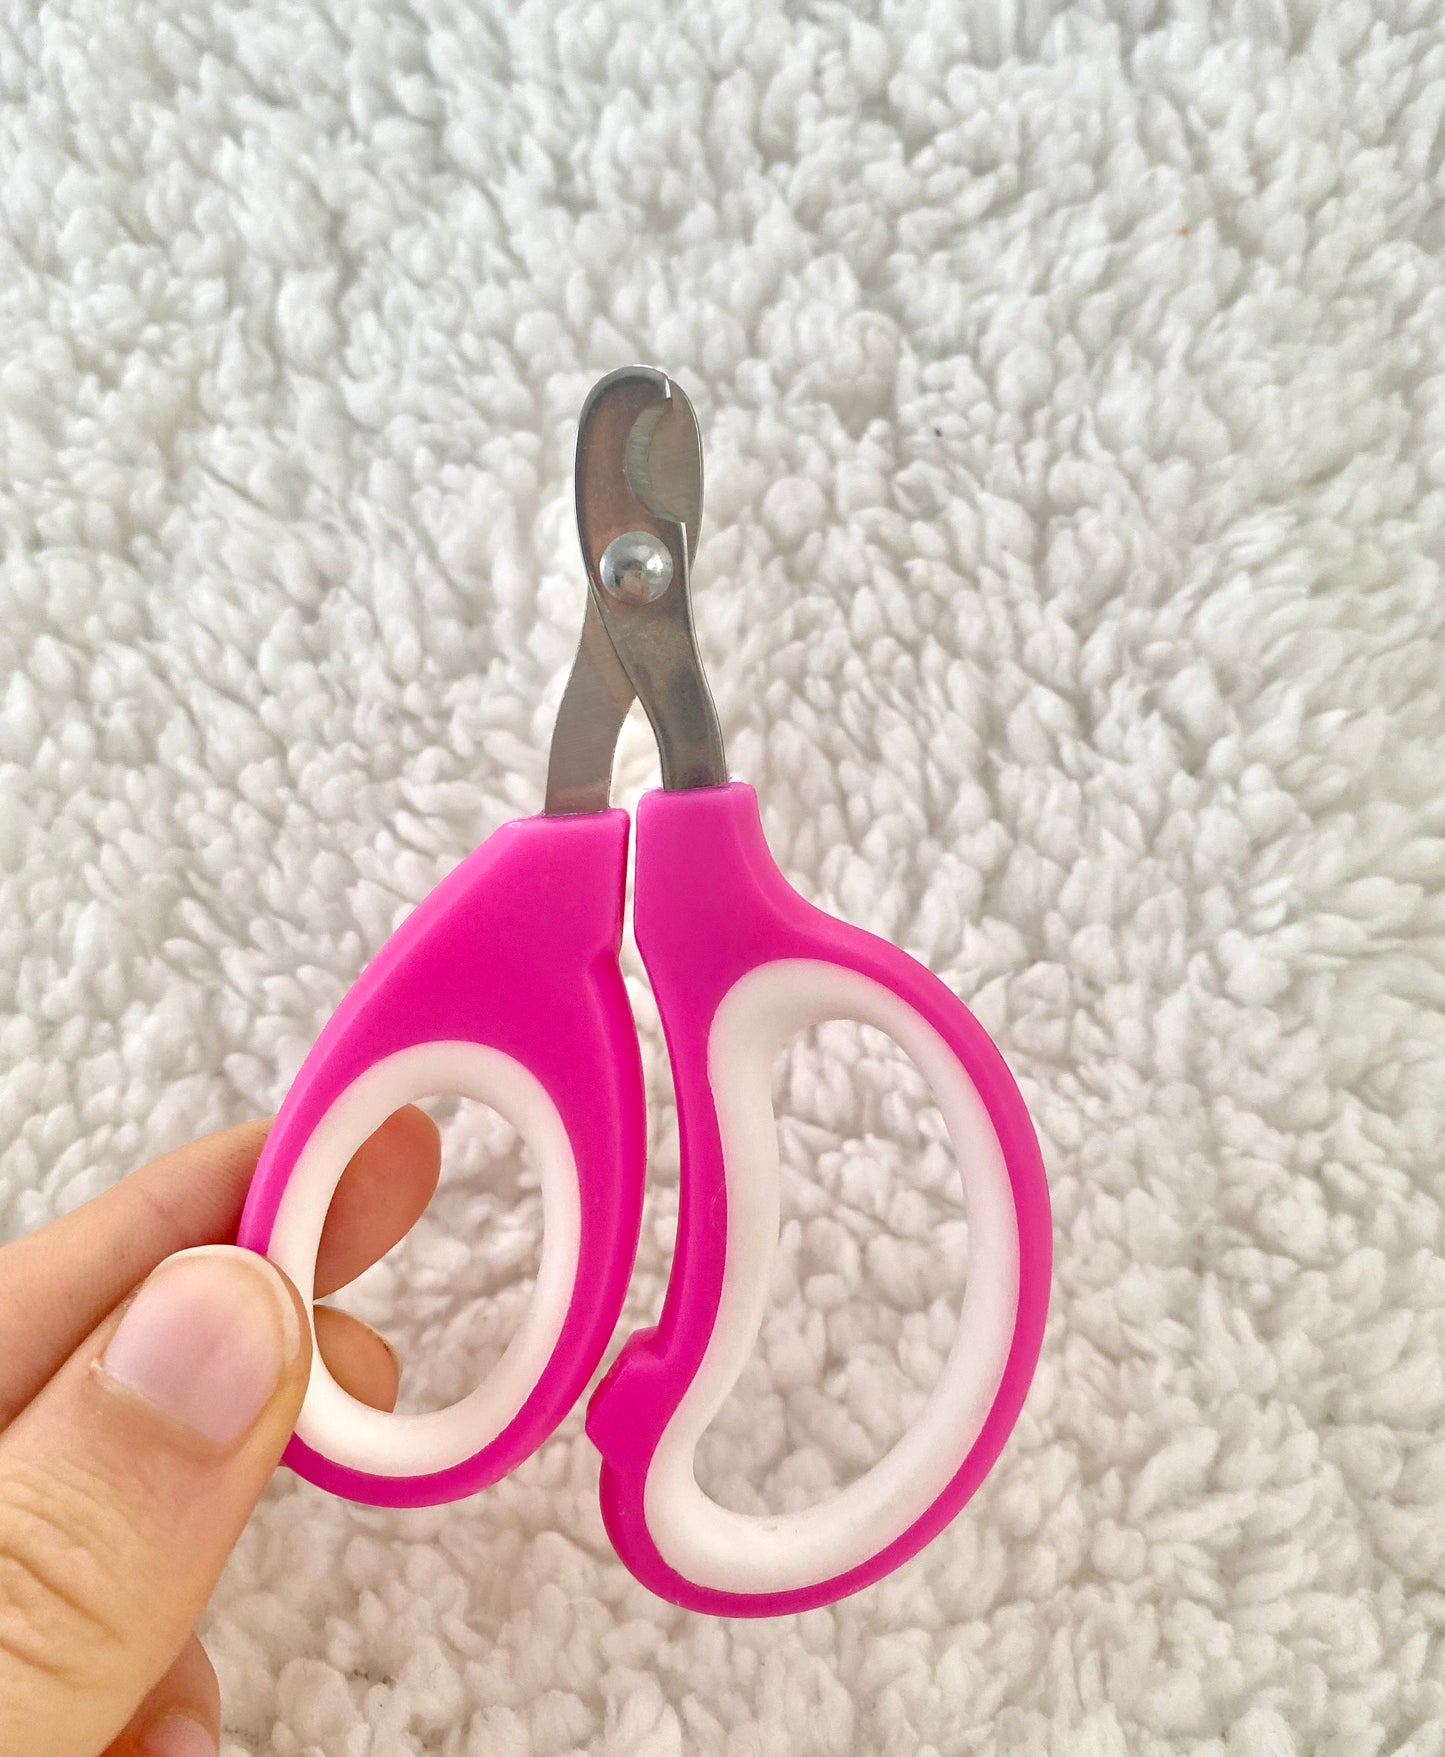 Bunny nail clippers